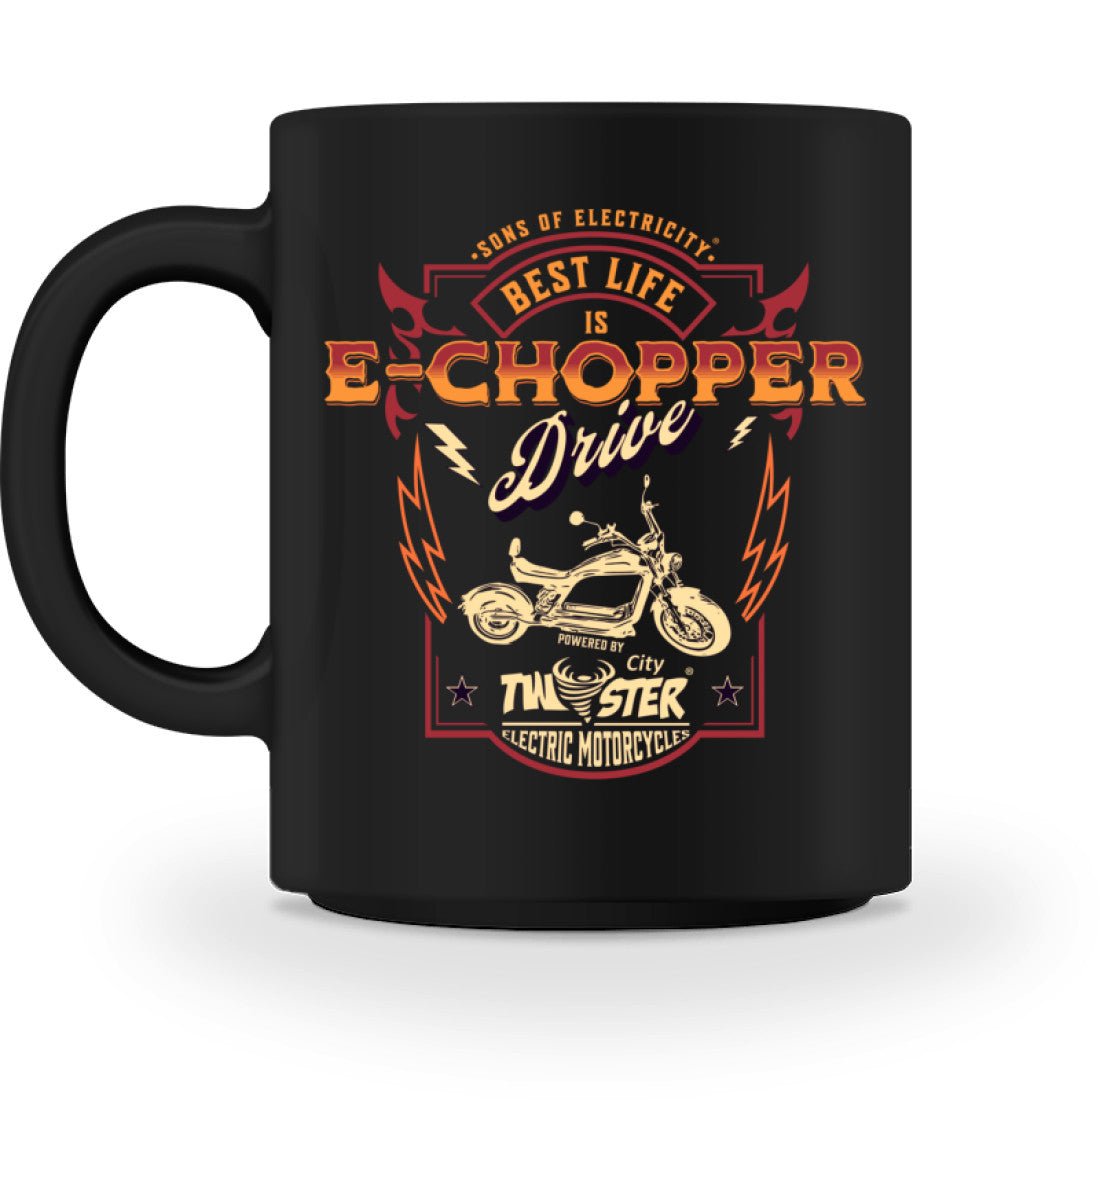 E-Chopper Tasse: SONS OF ELECTRICITY- Best Life is Drive -